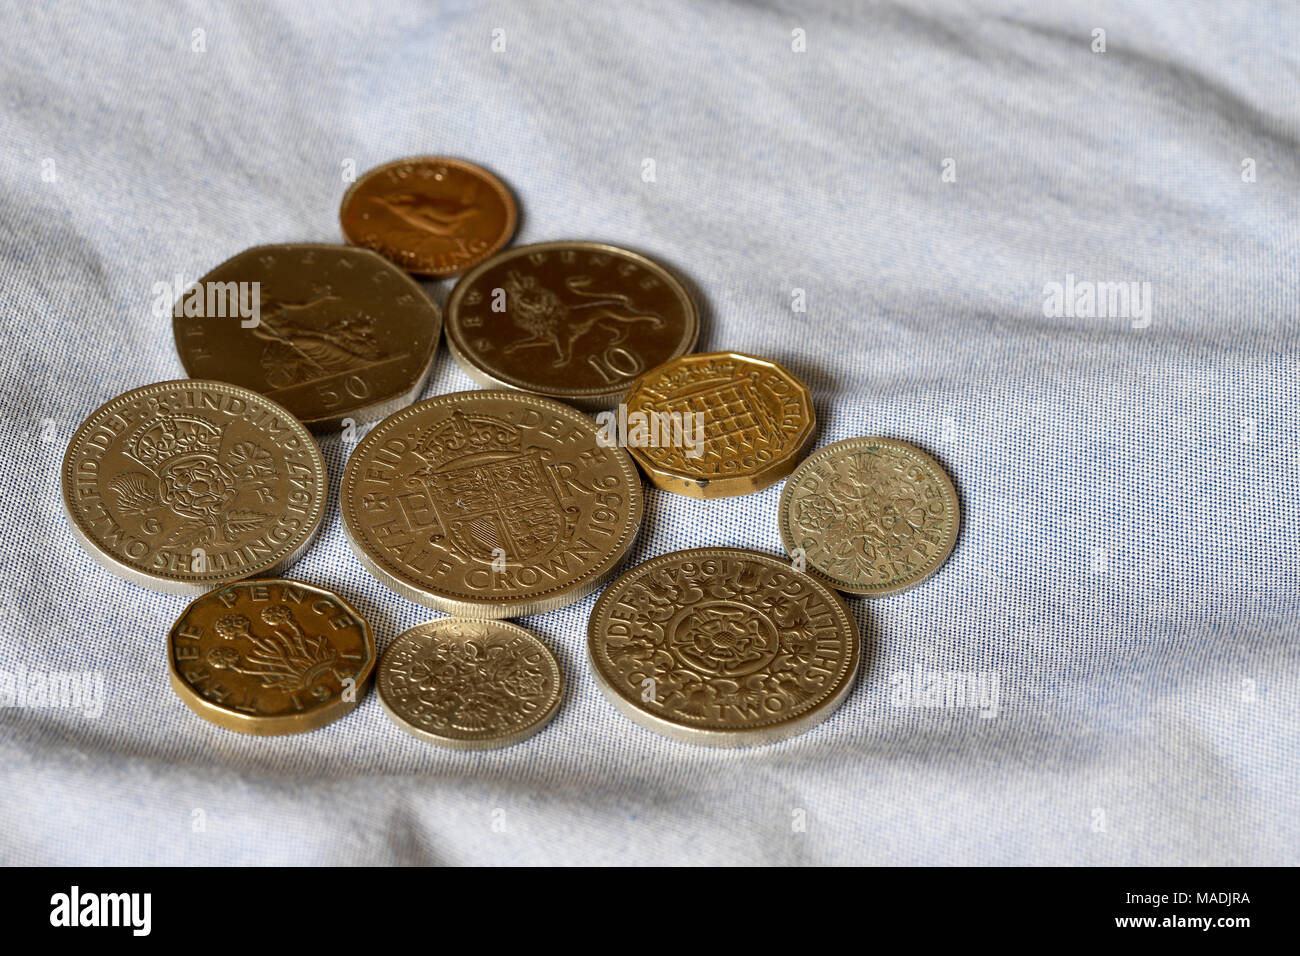 British identity and nostalgia for the past. Coins from the pre decimal and early decimal eras including half crown and two shilling pieces. Stock Photo